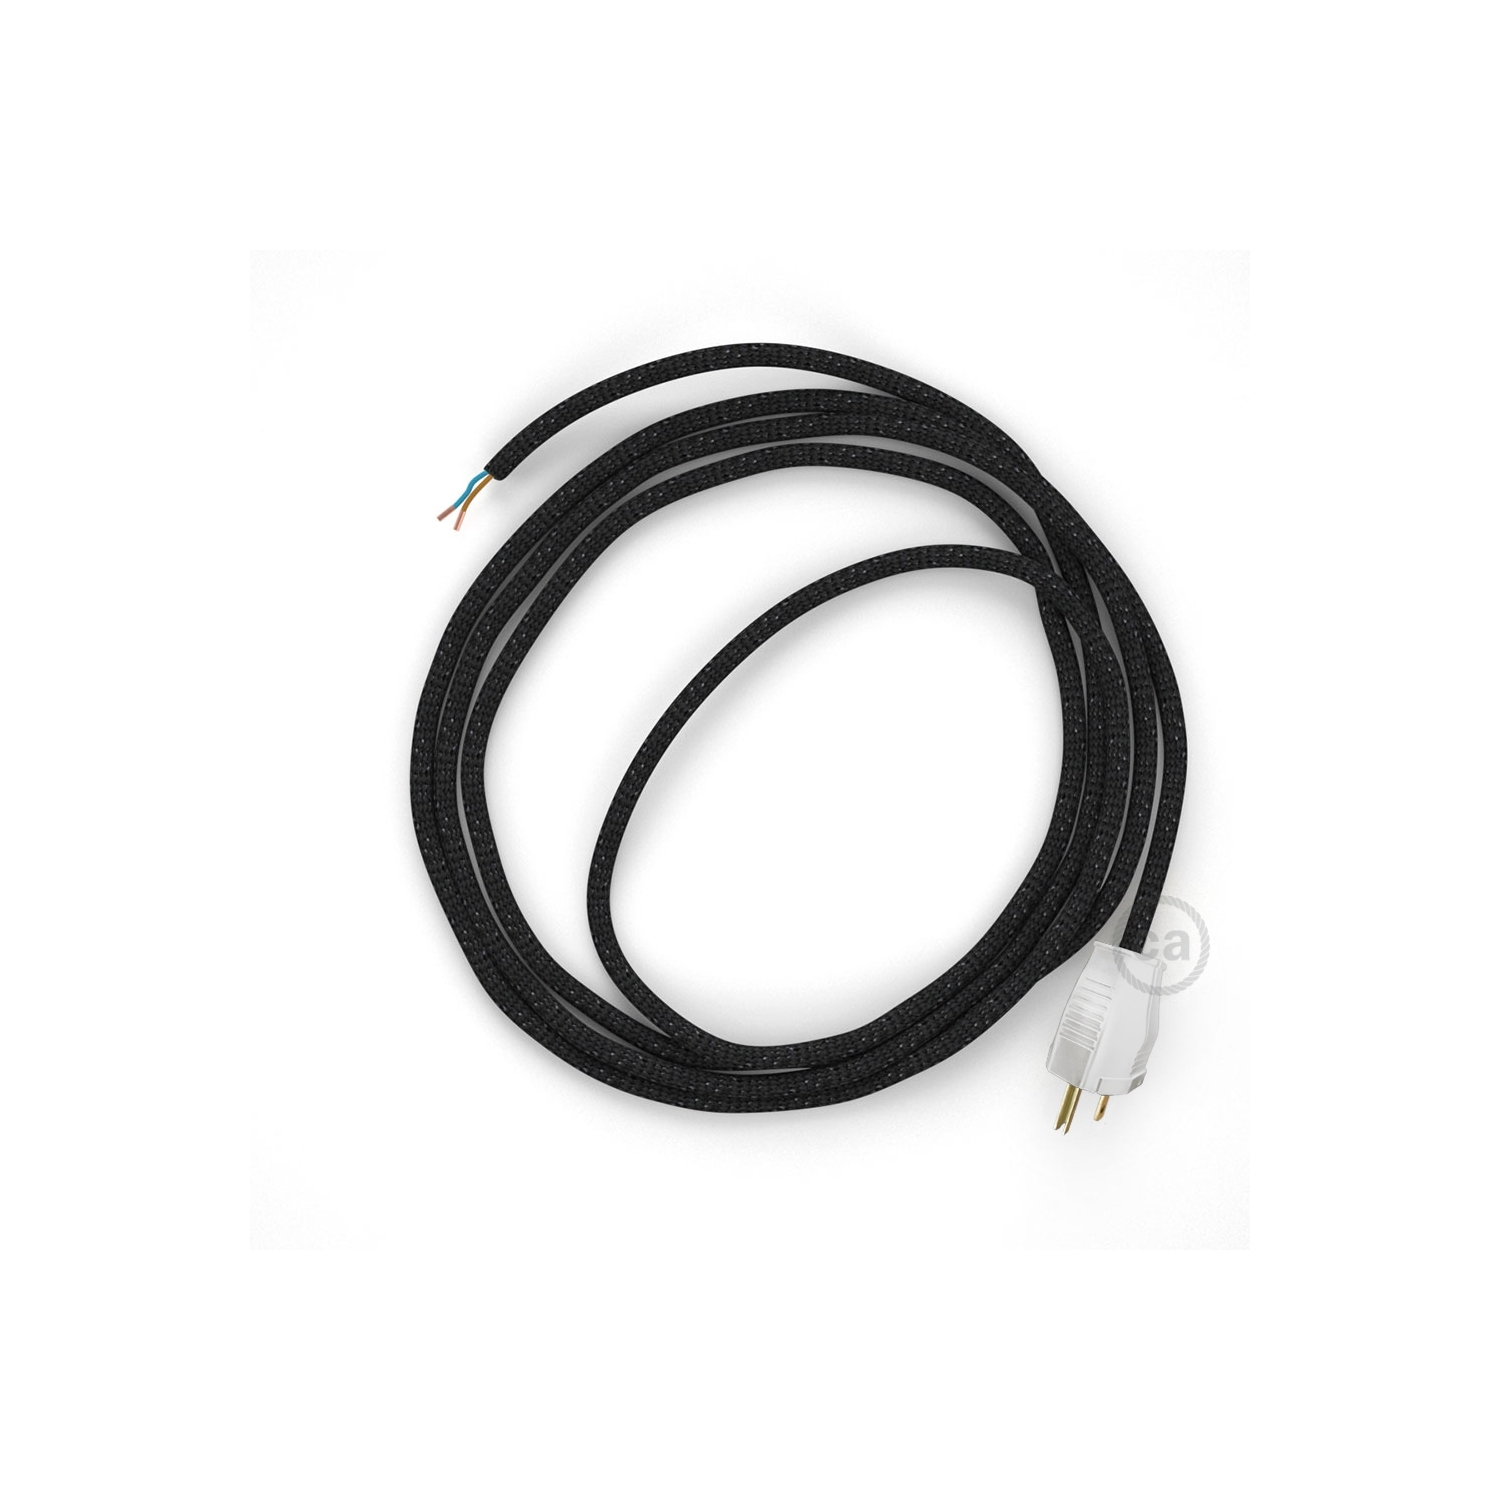 Cord-set - RL04 Black Glitter Covered Round Cable